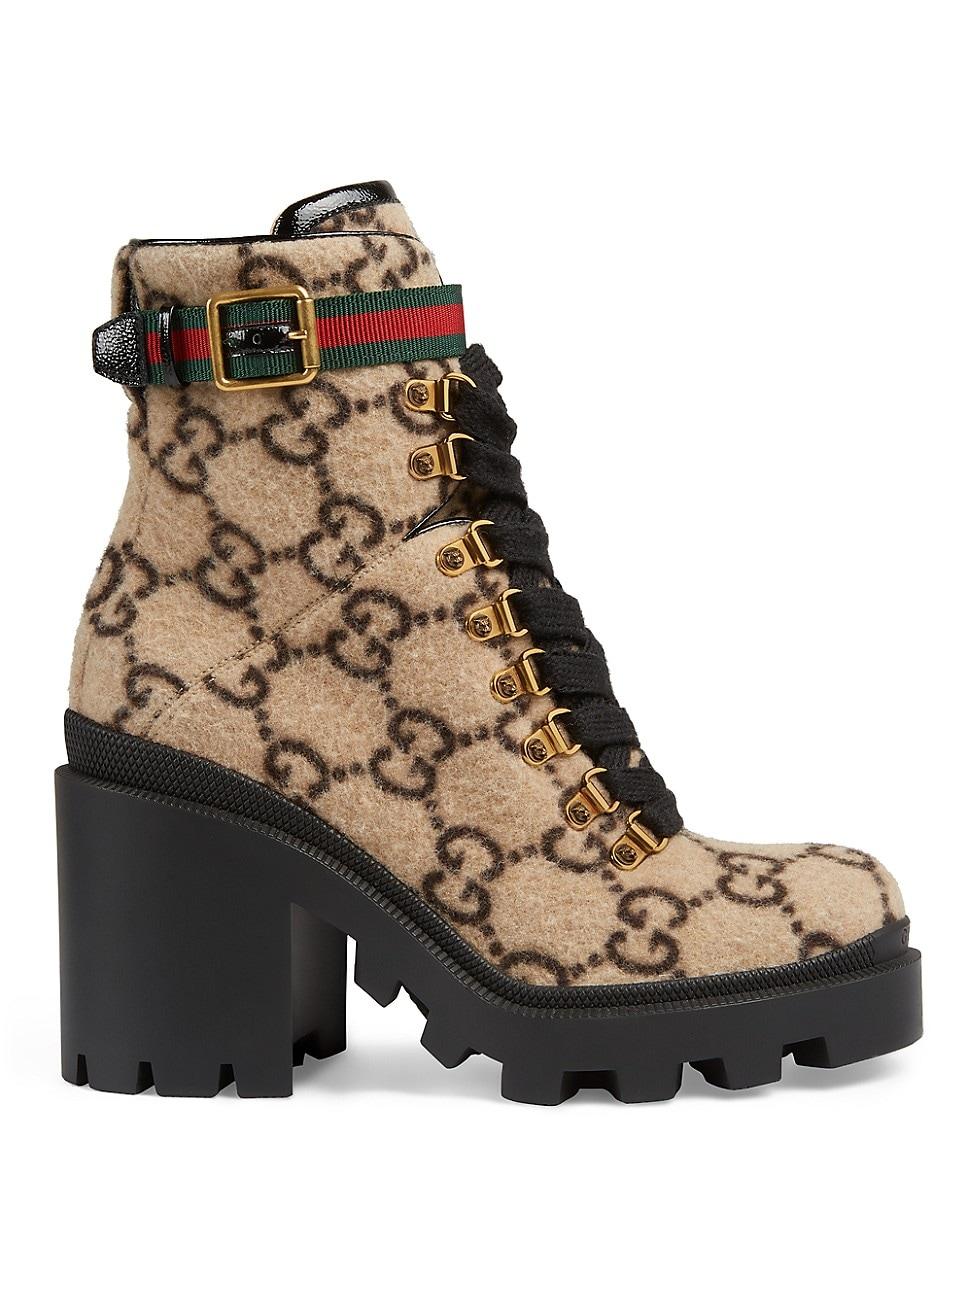 gucci boots look alike